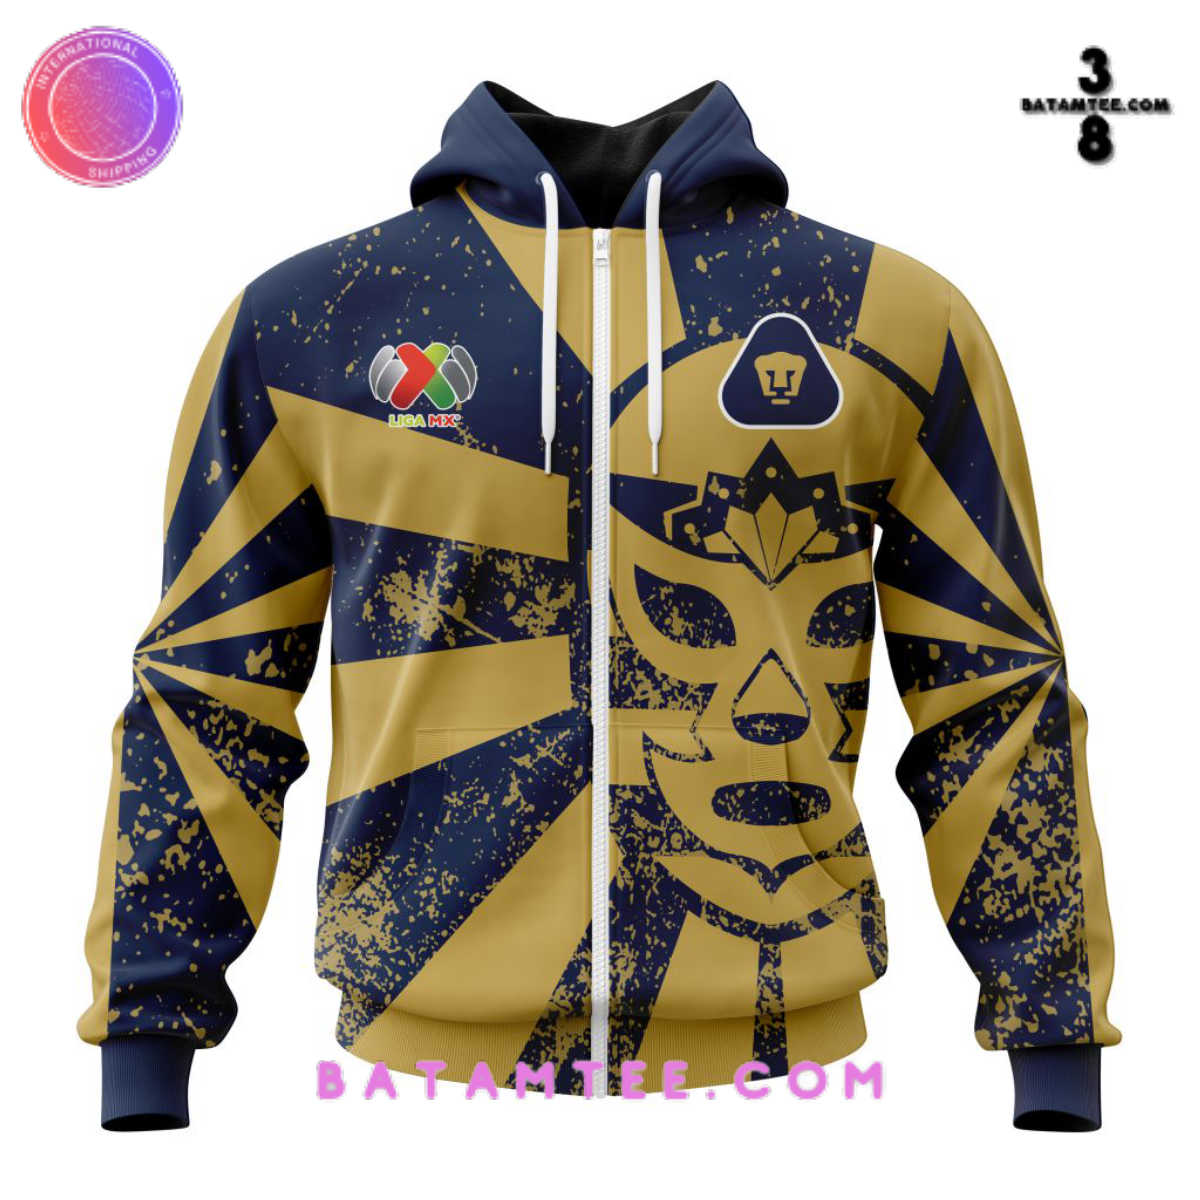 IGA MX Pumas UNAM Special Lucha Libre Design Personalized Hoodie's Overview - Batamtee Shop - Threads & Totes: Your Style Destination